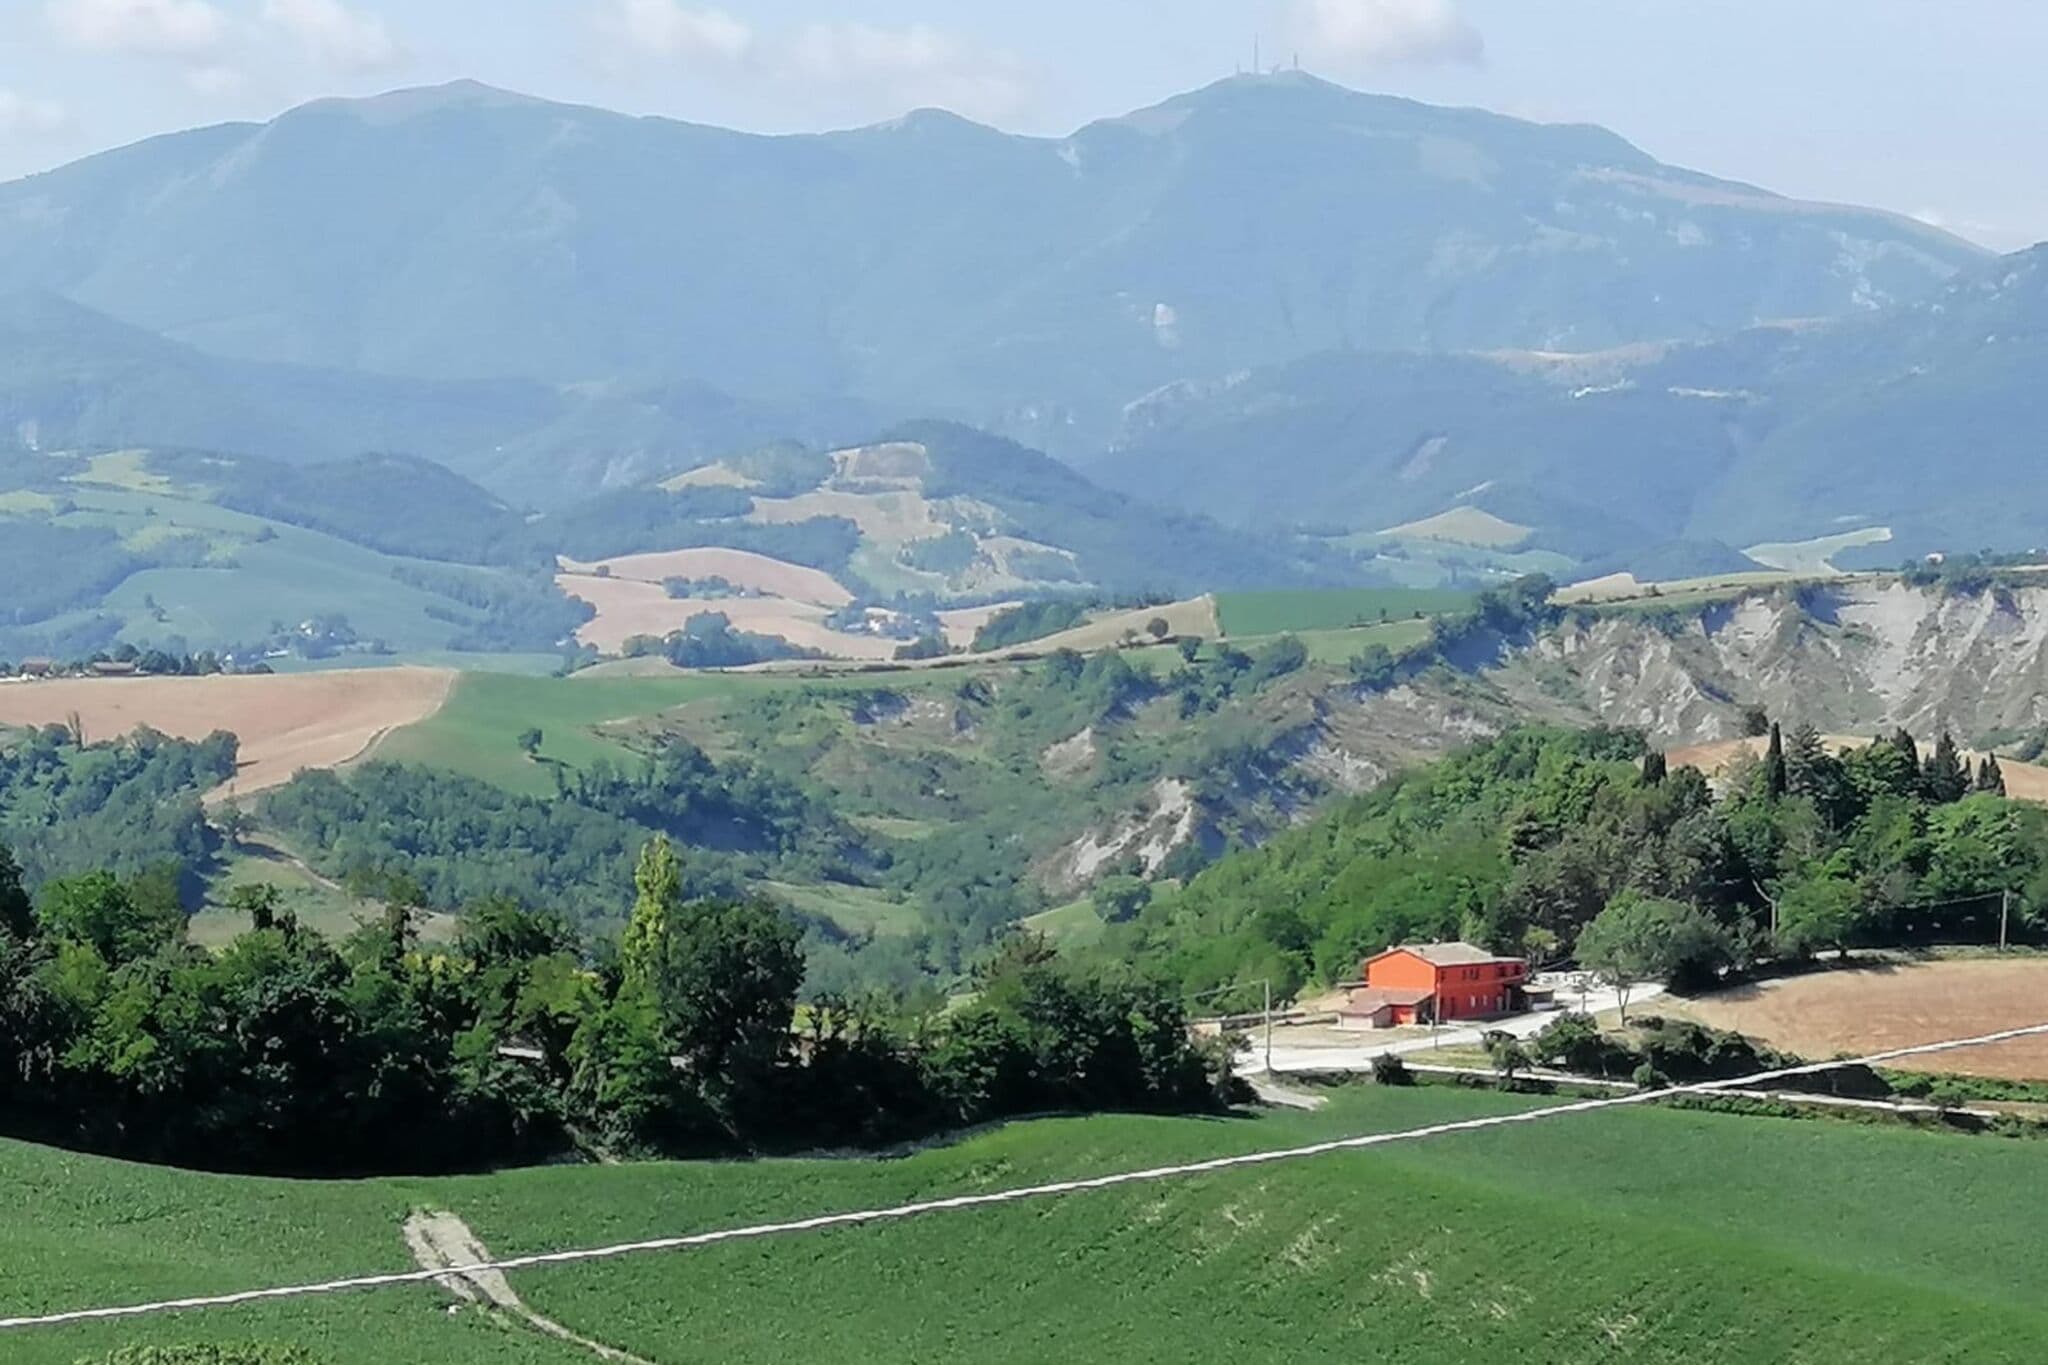 Cozy holiday home in the charming Urbino countryside